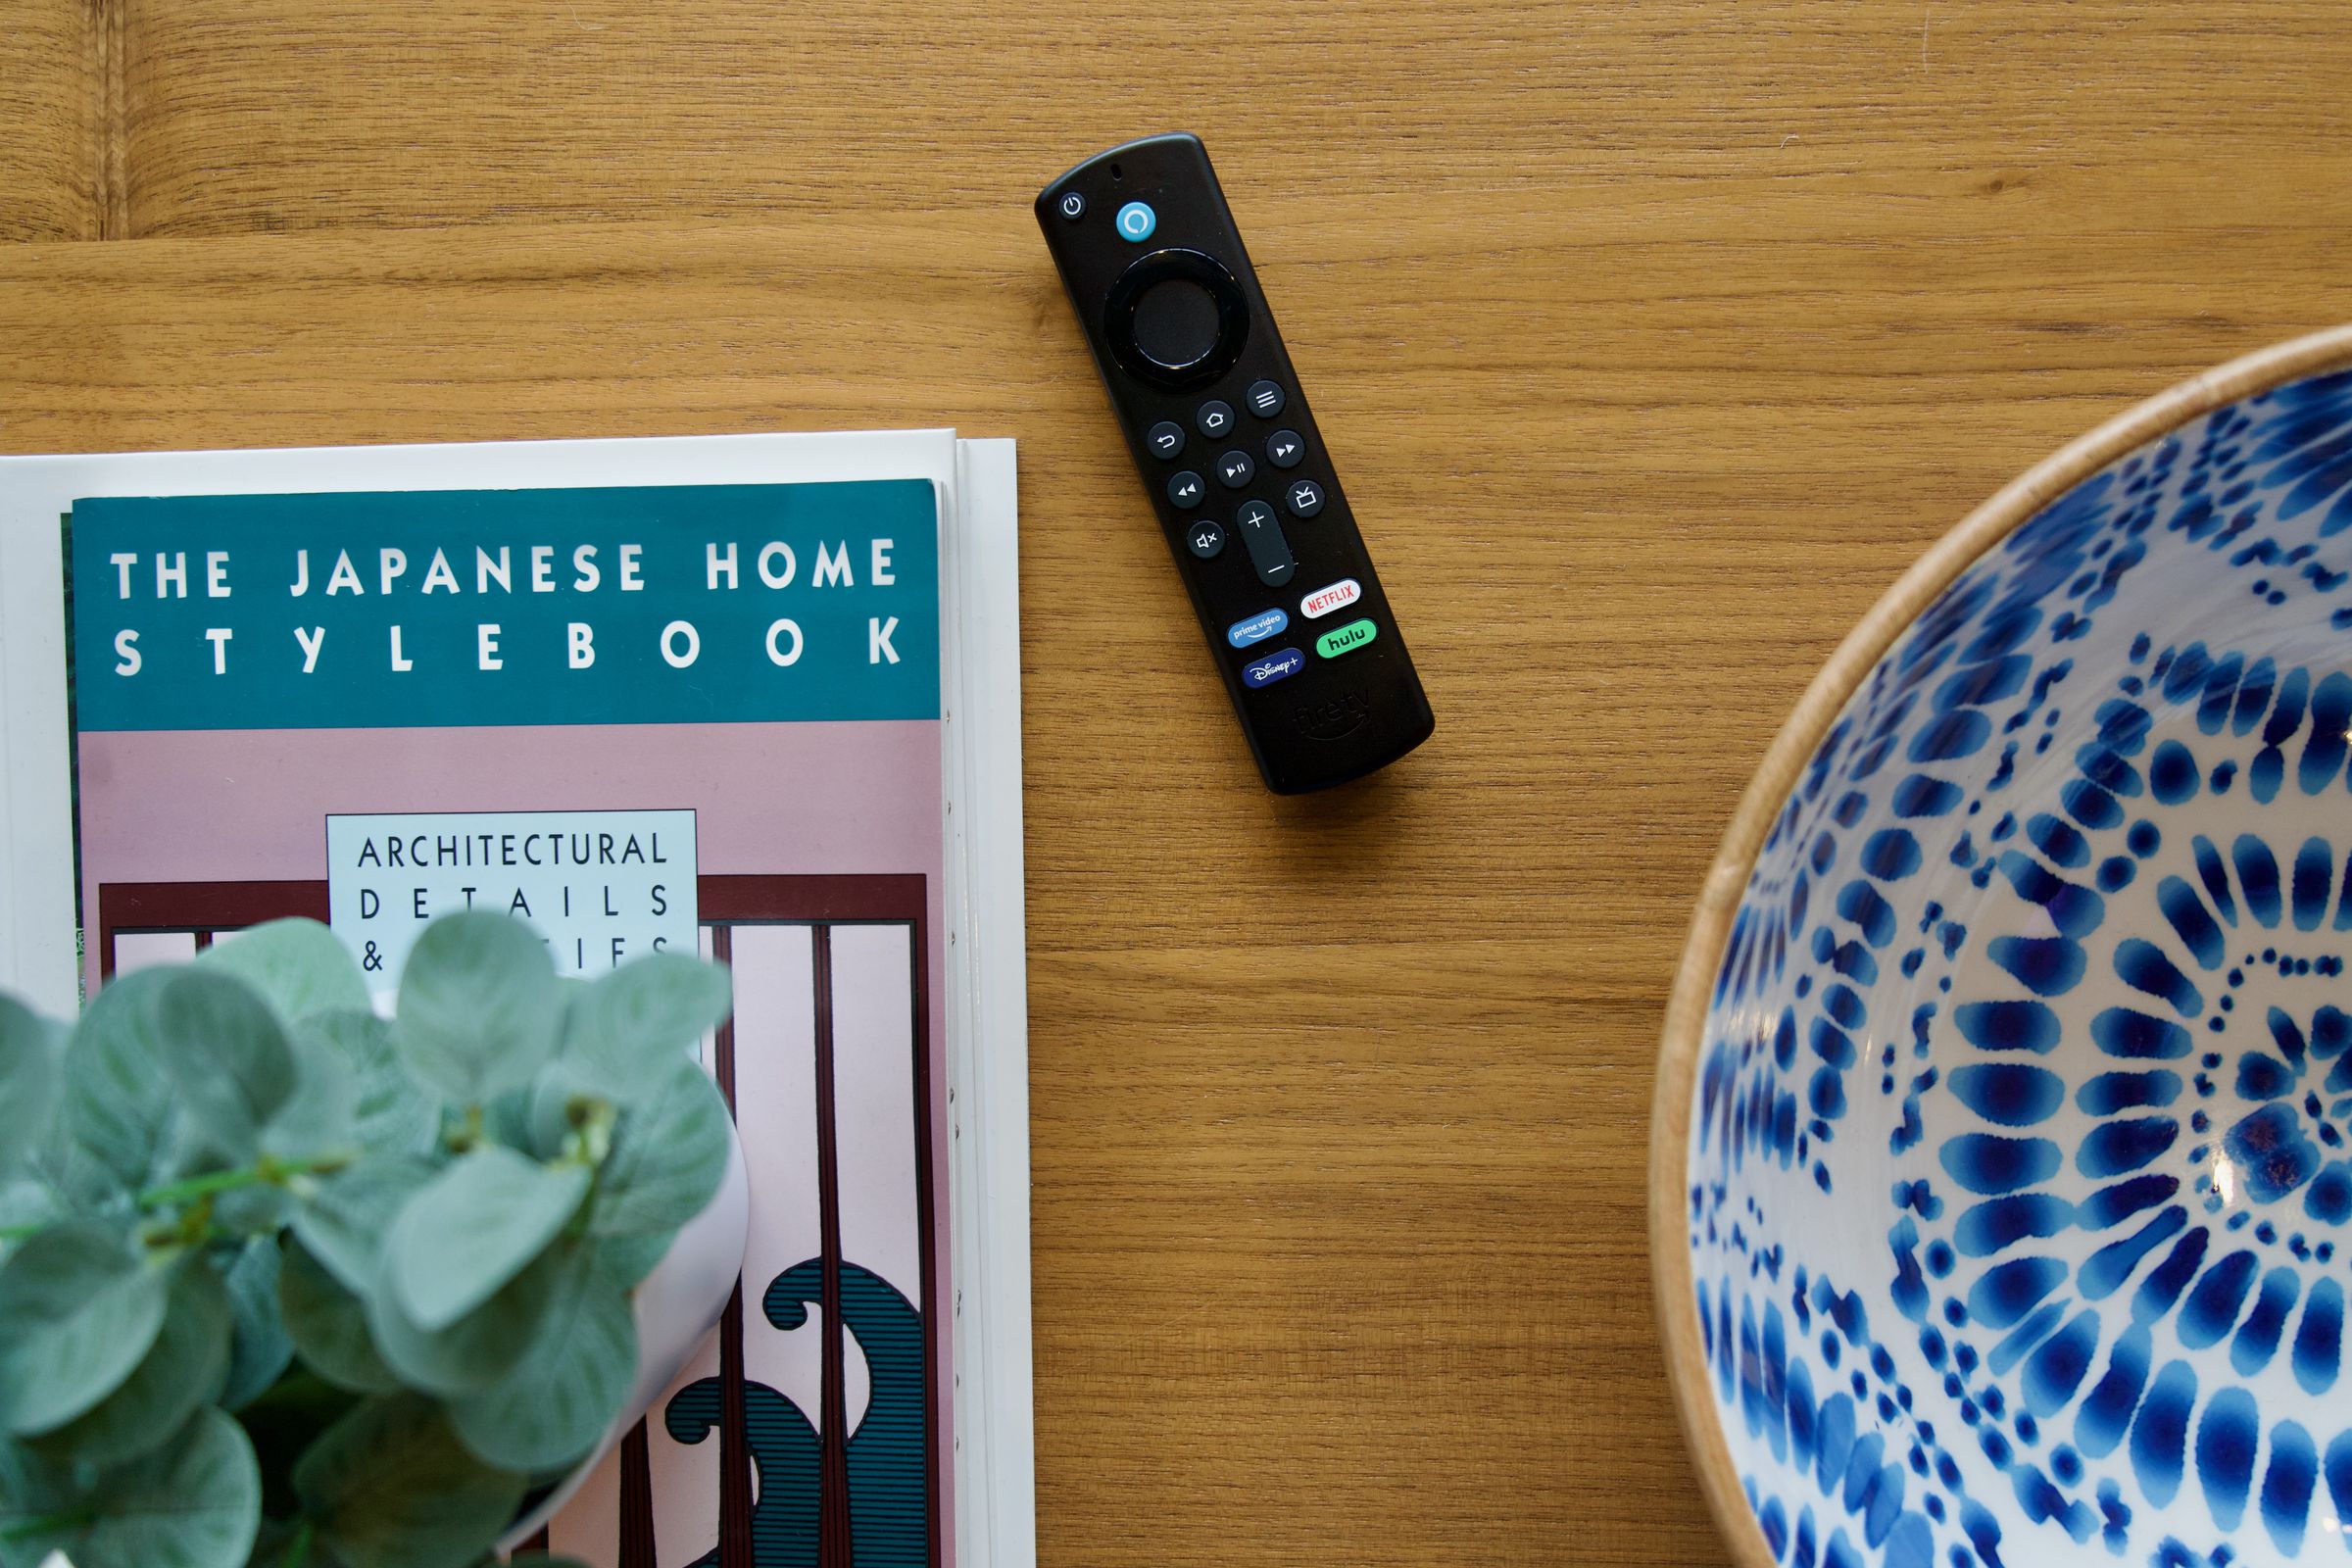 With Matter Casting, you can still control the content using the Fire TV remote, as well as in the app on your phone.